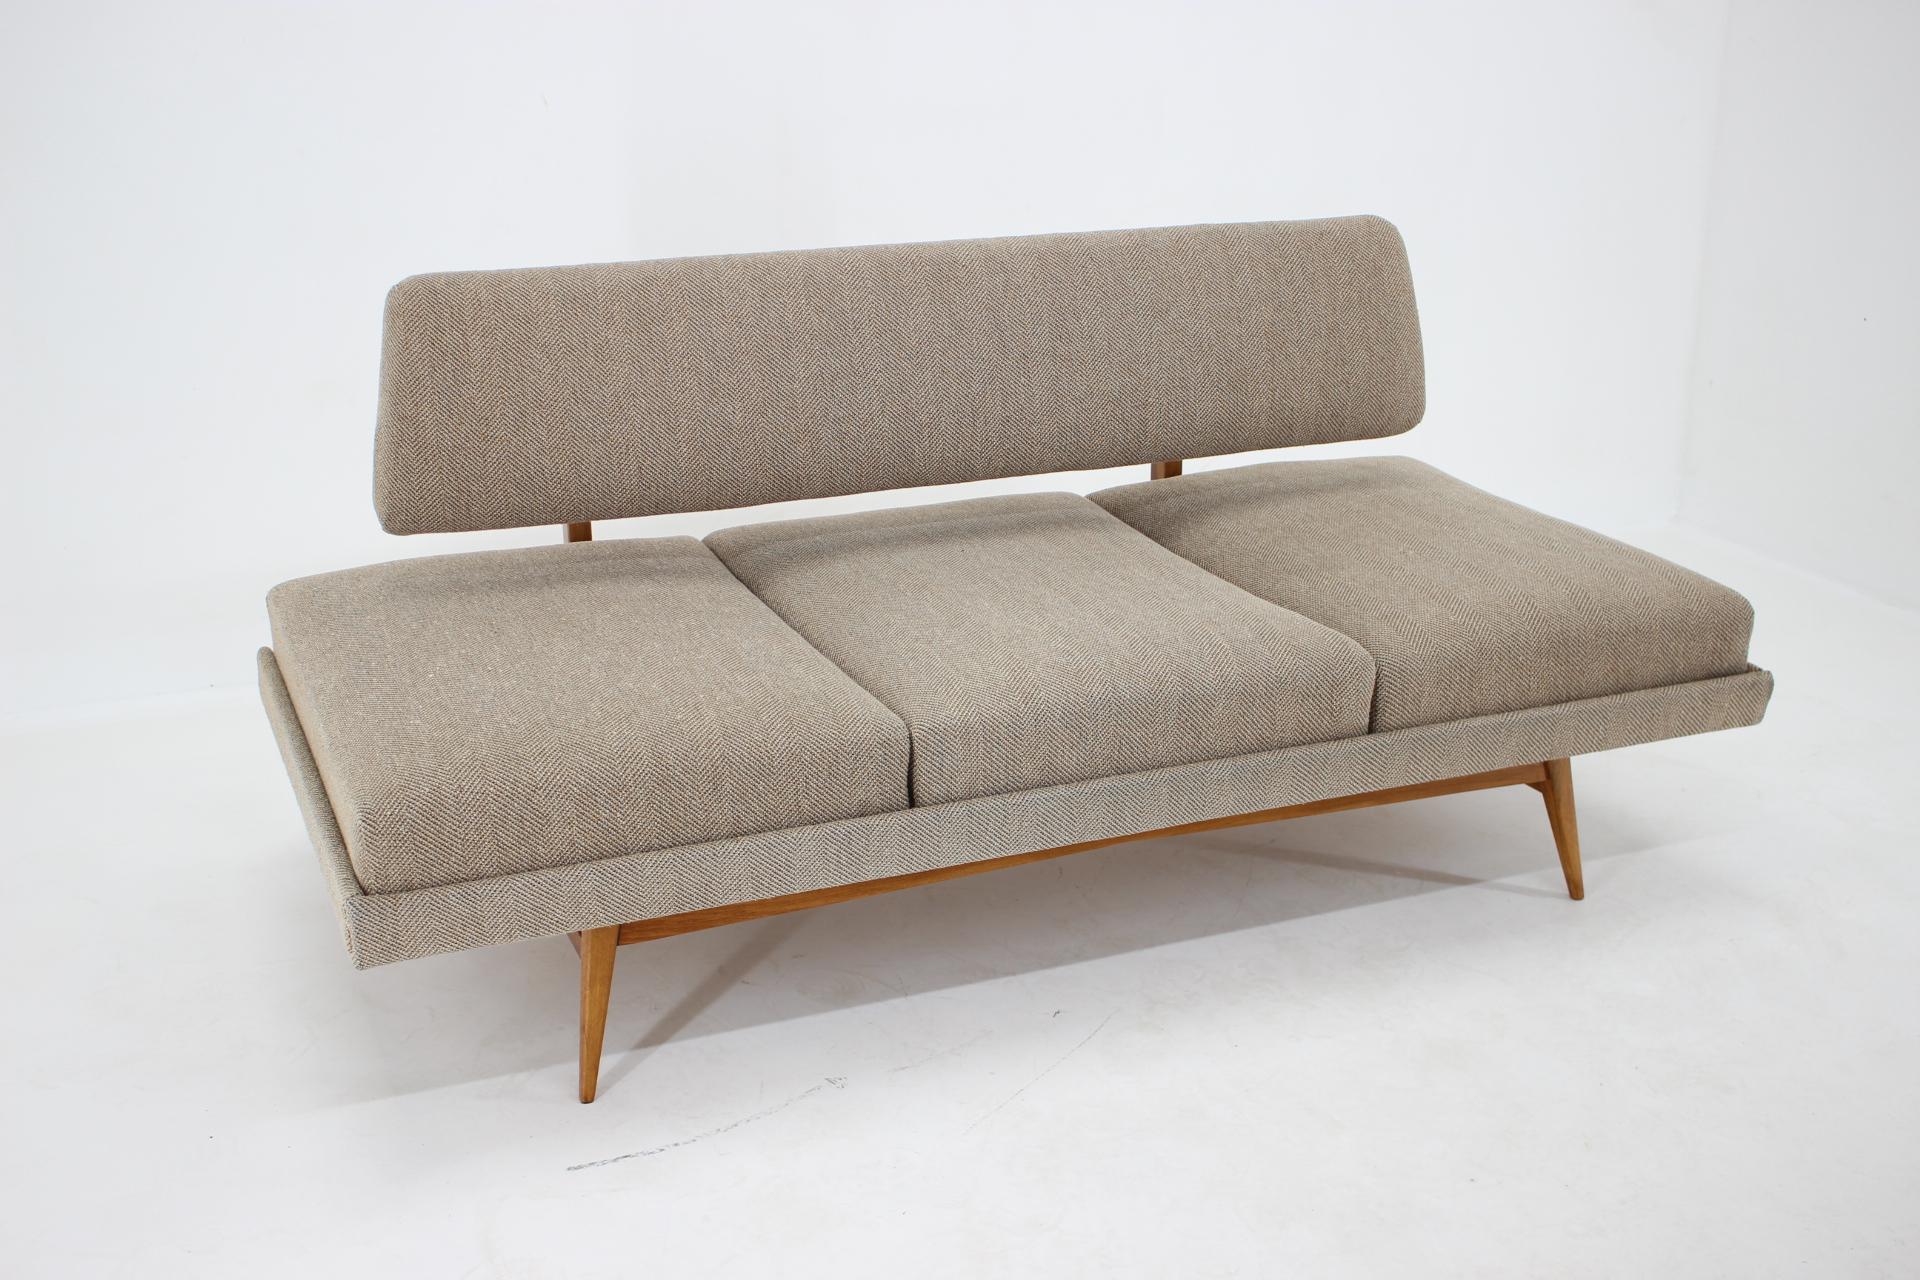 Mid-Century Modern Unique and beautiful adjustable sofa in style of Knoll - around 1960s/